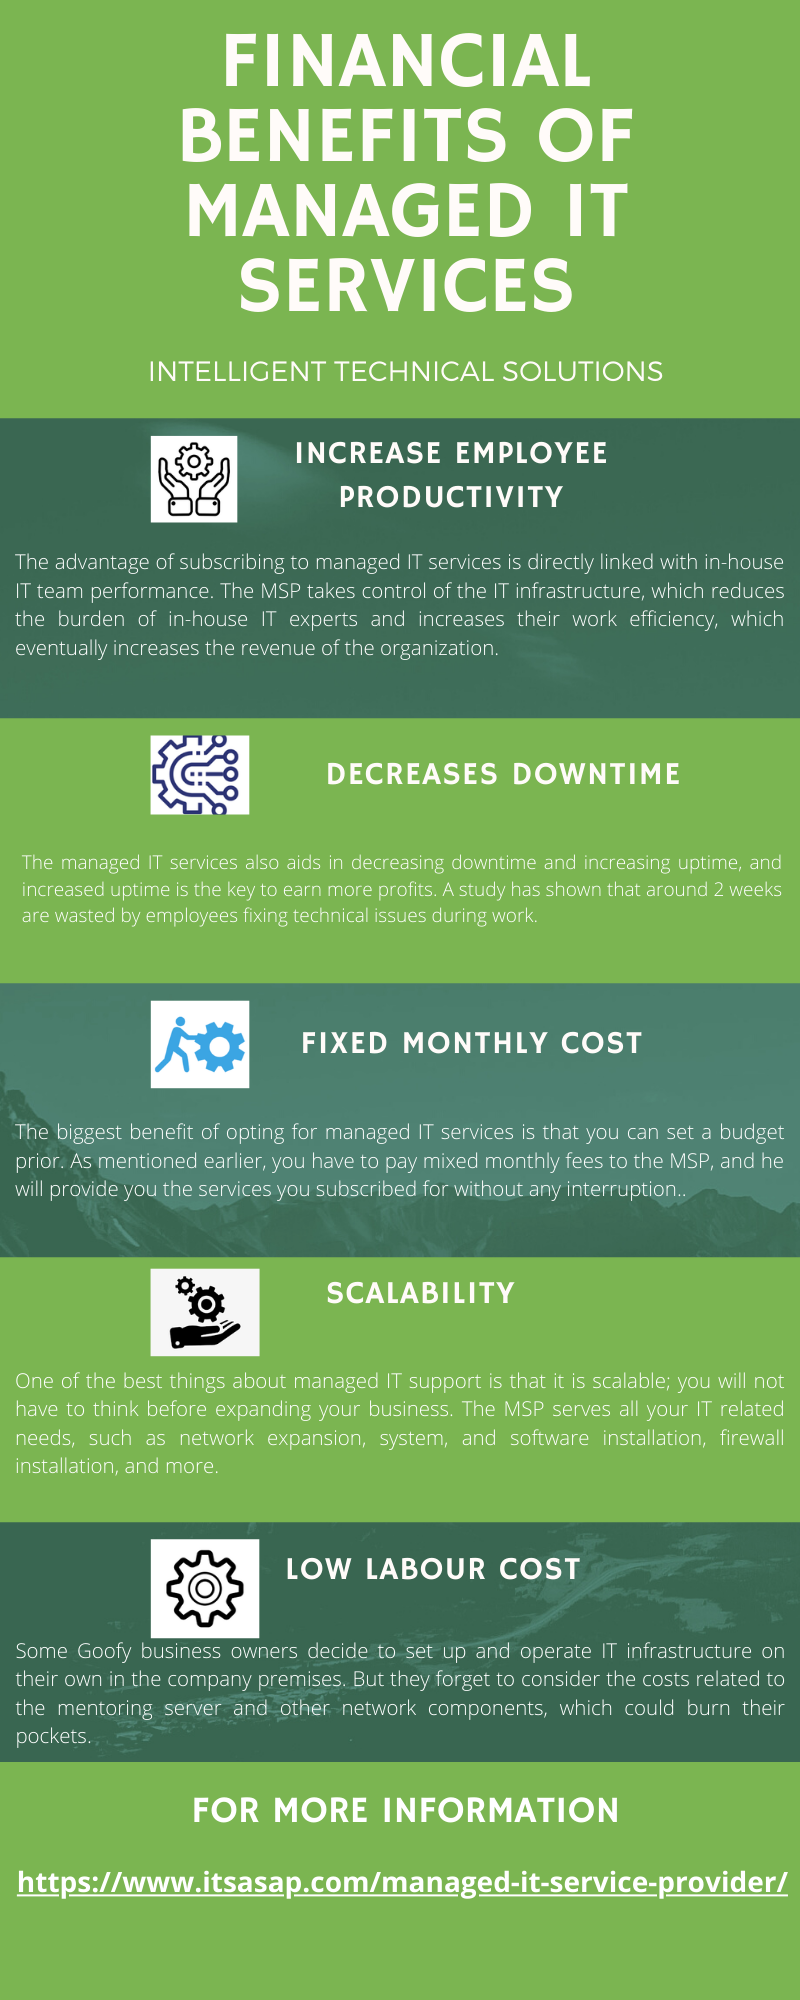 Financial Benefits Of Managed IT Services